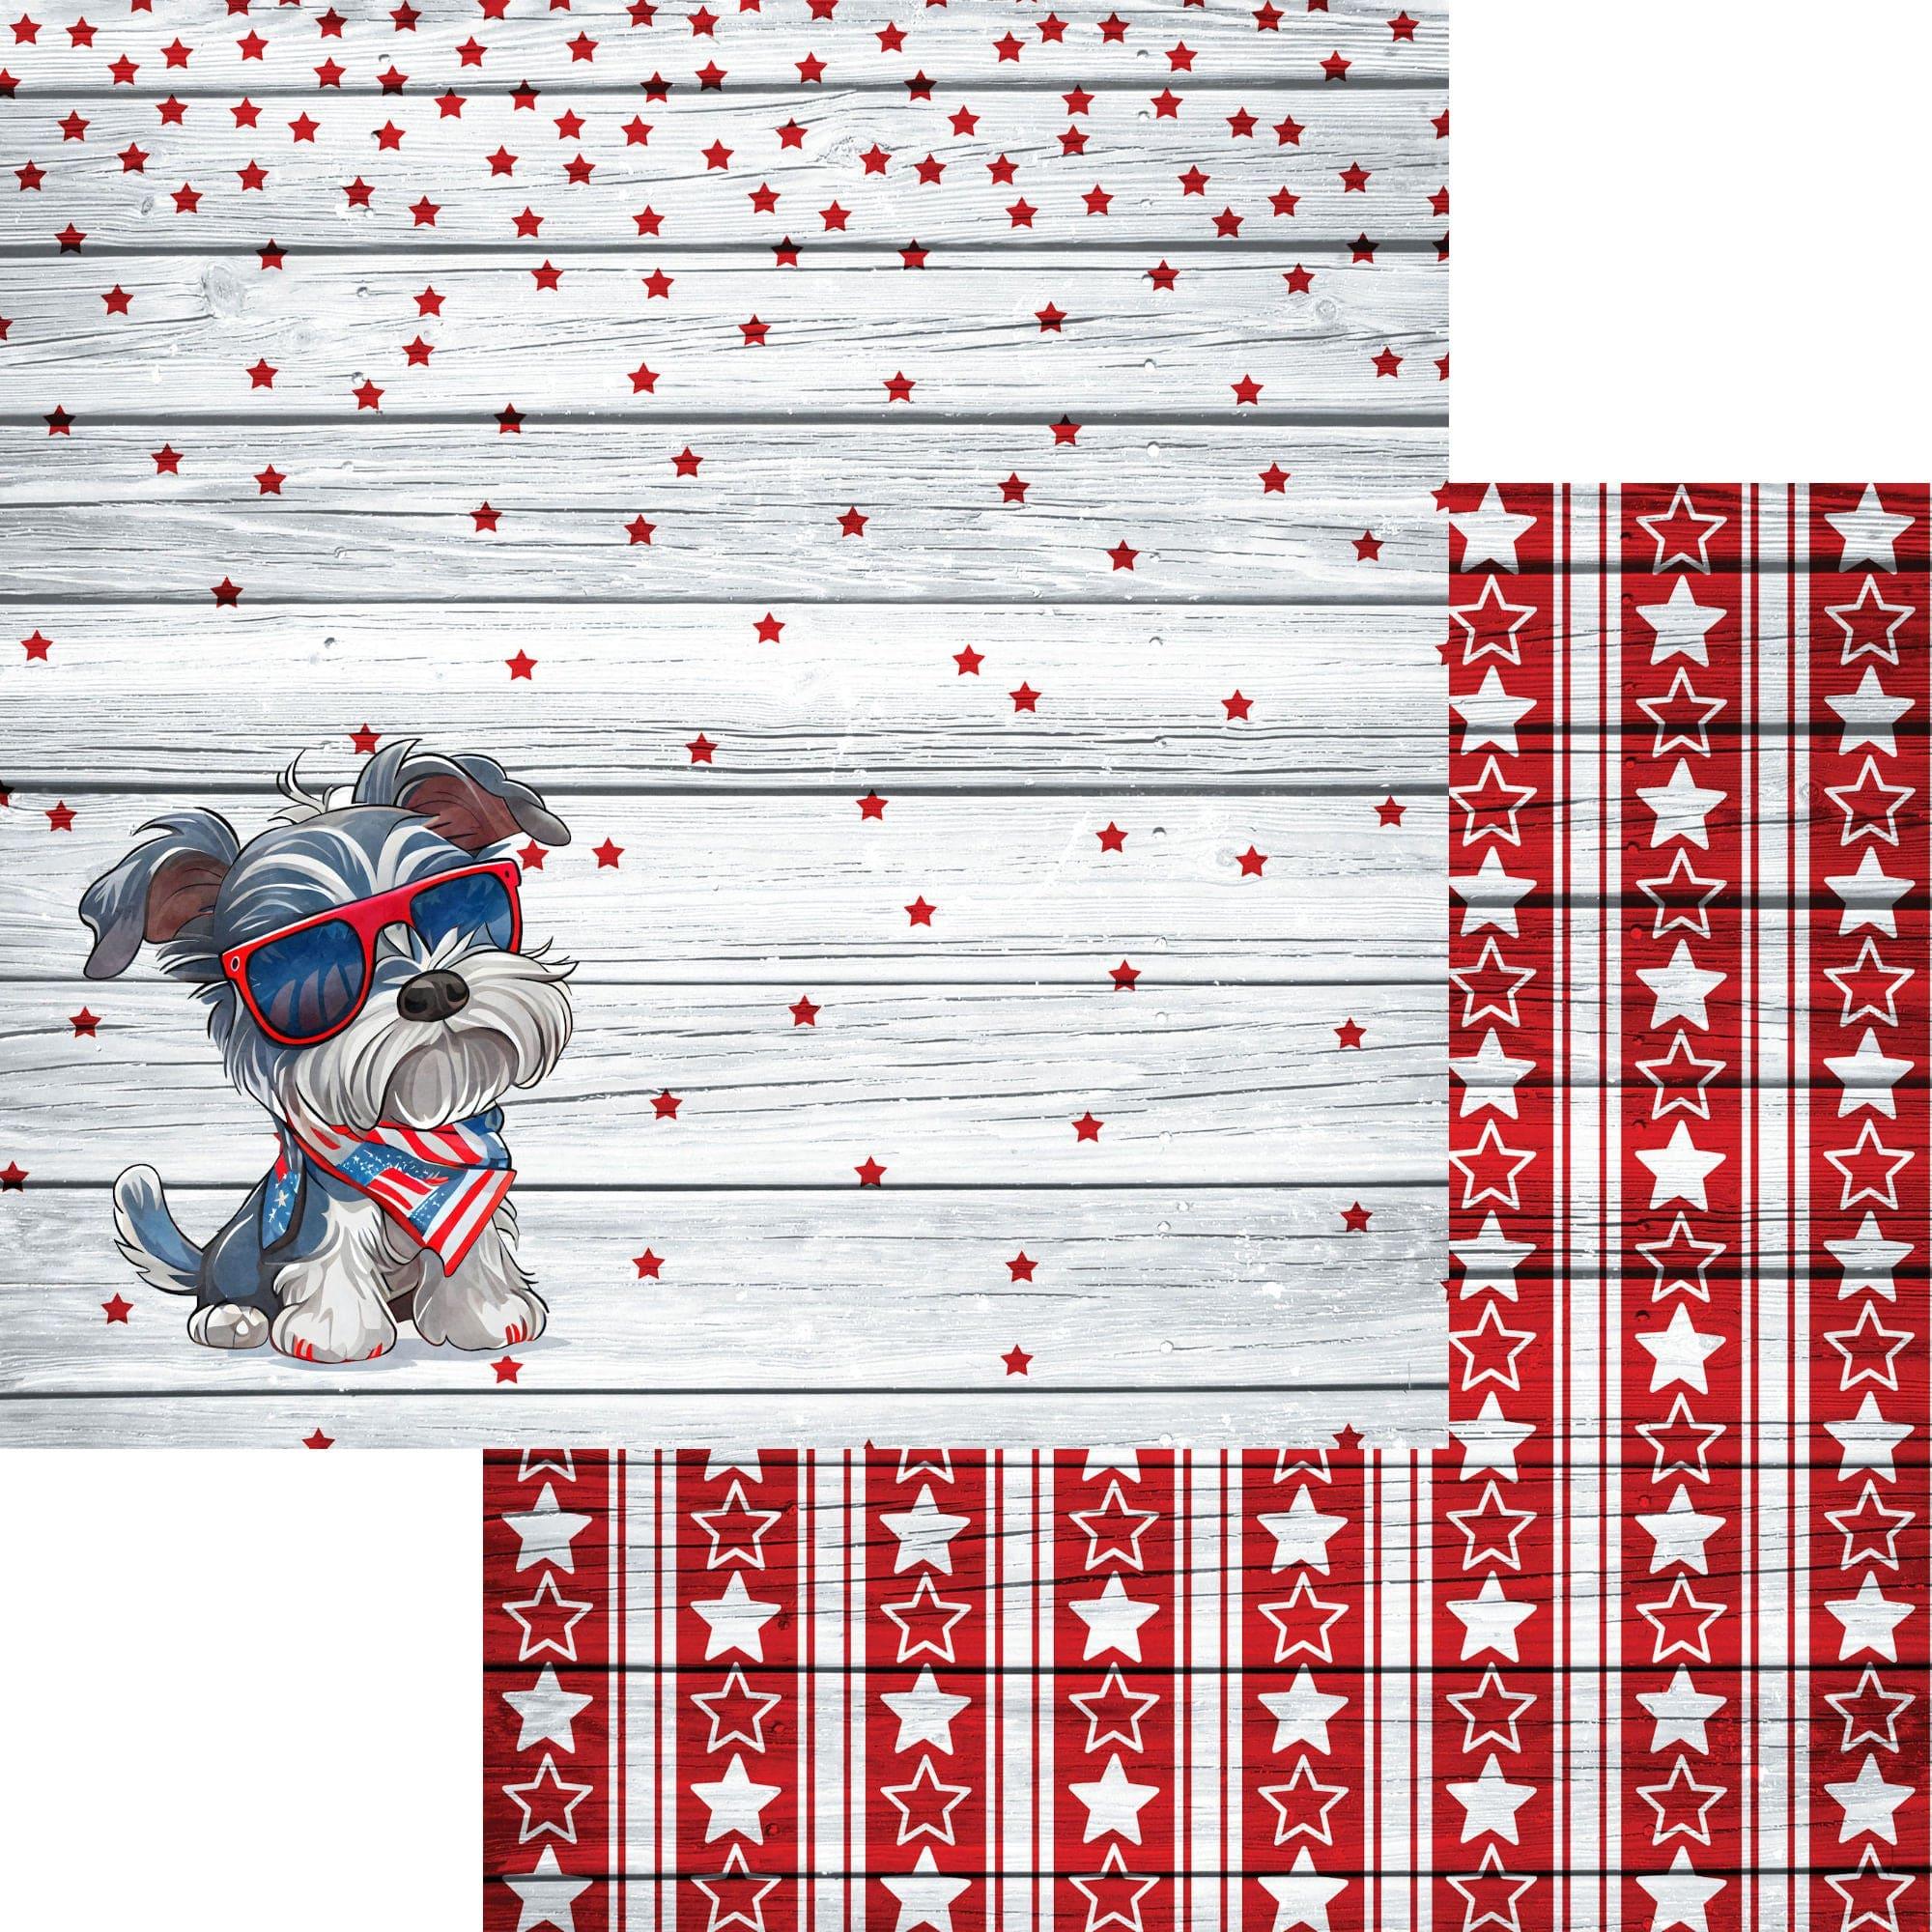 Patriotic Pups Collection Mini Schnauzer 12 x 12 Double-Sided Scrapbook Paper by SSC Designs - Scrapbook Supply Companies